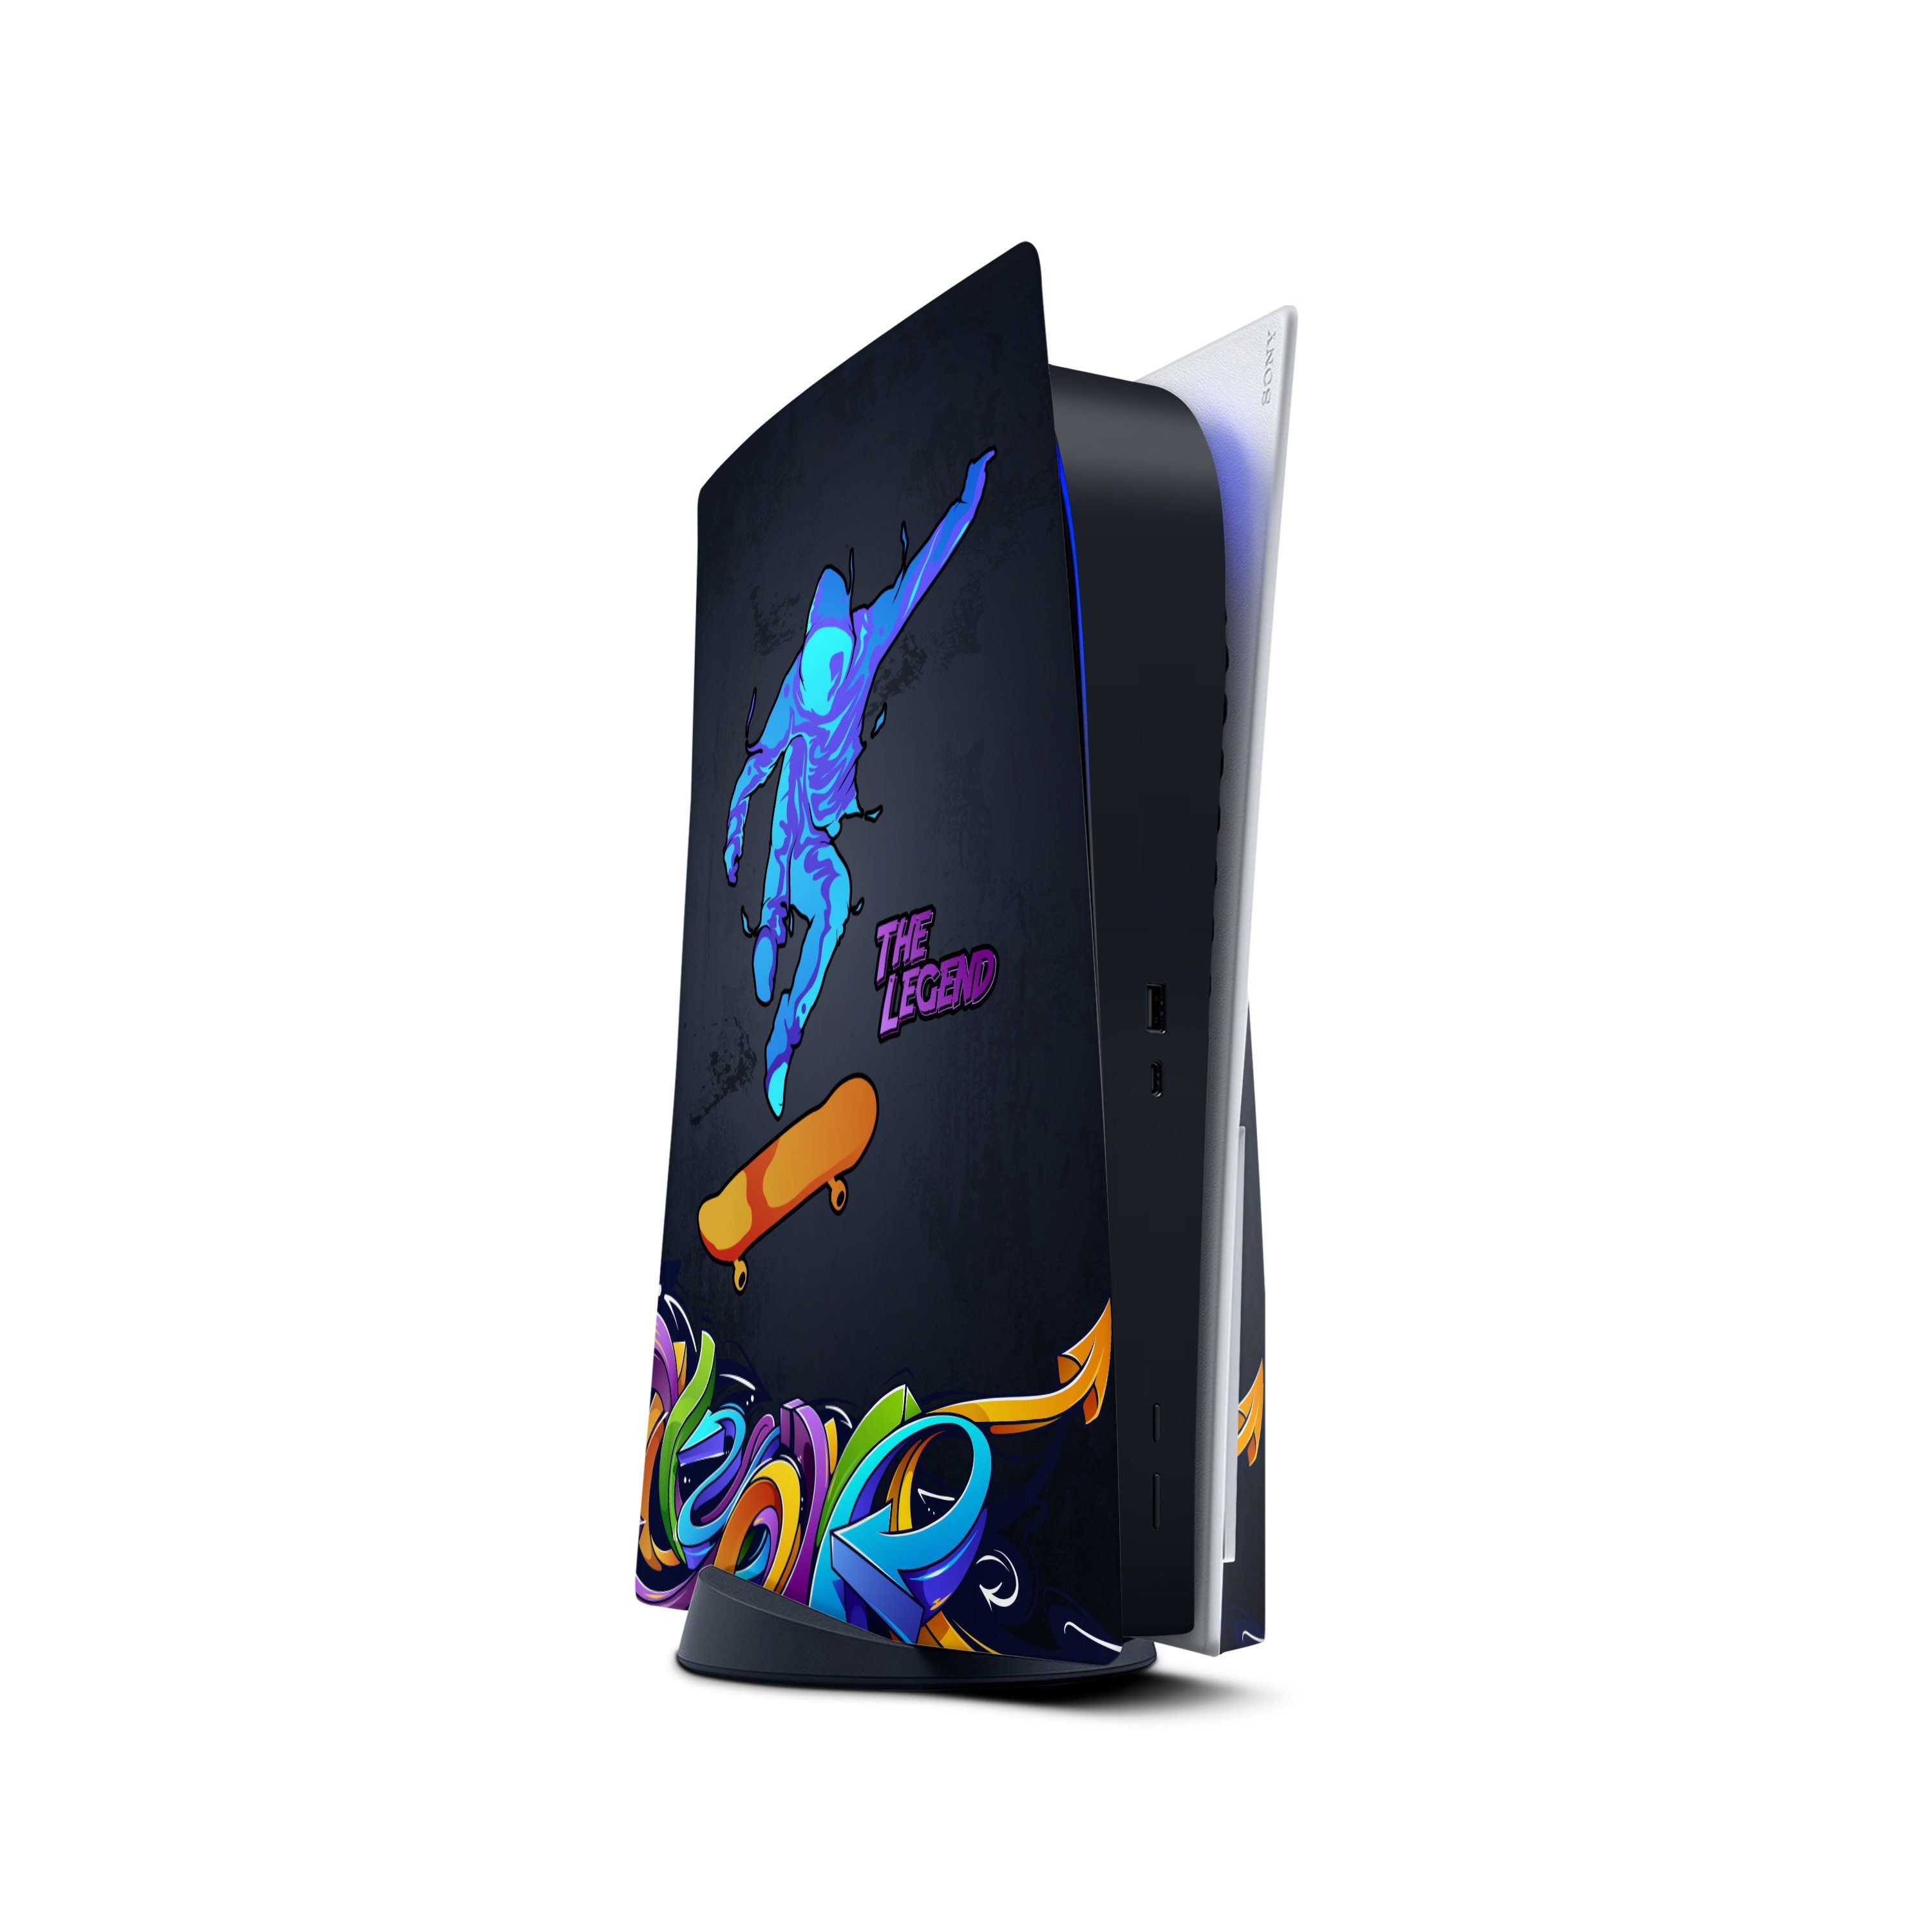 Buy Ps5 Skin TECH, Playstation 5 Controller Skin, Vinyl 3m Stickers Full  Wrap Cover Online in India 